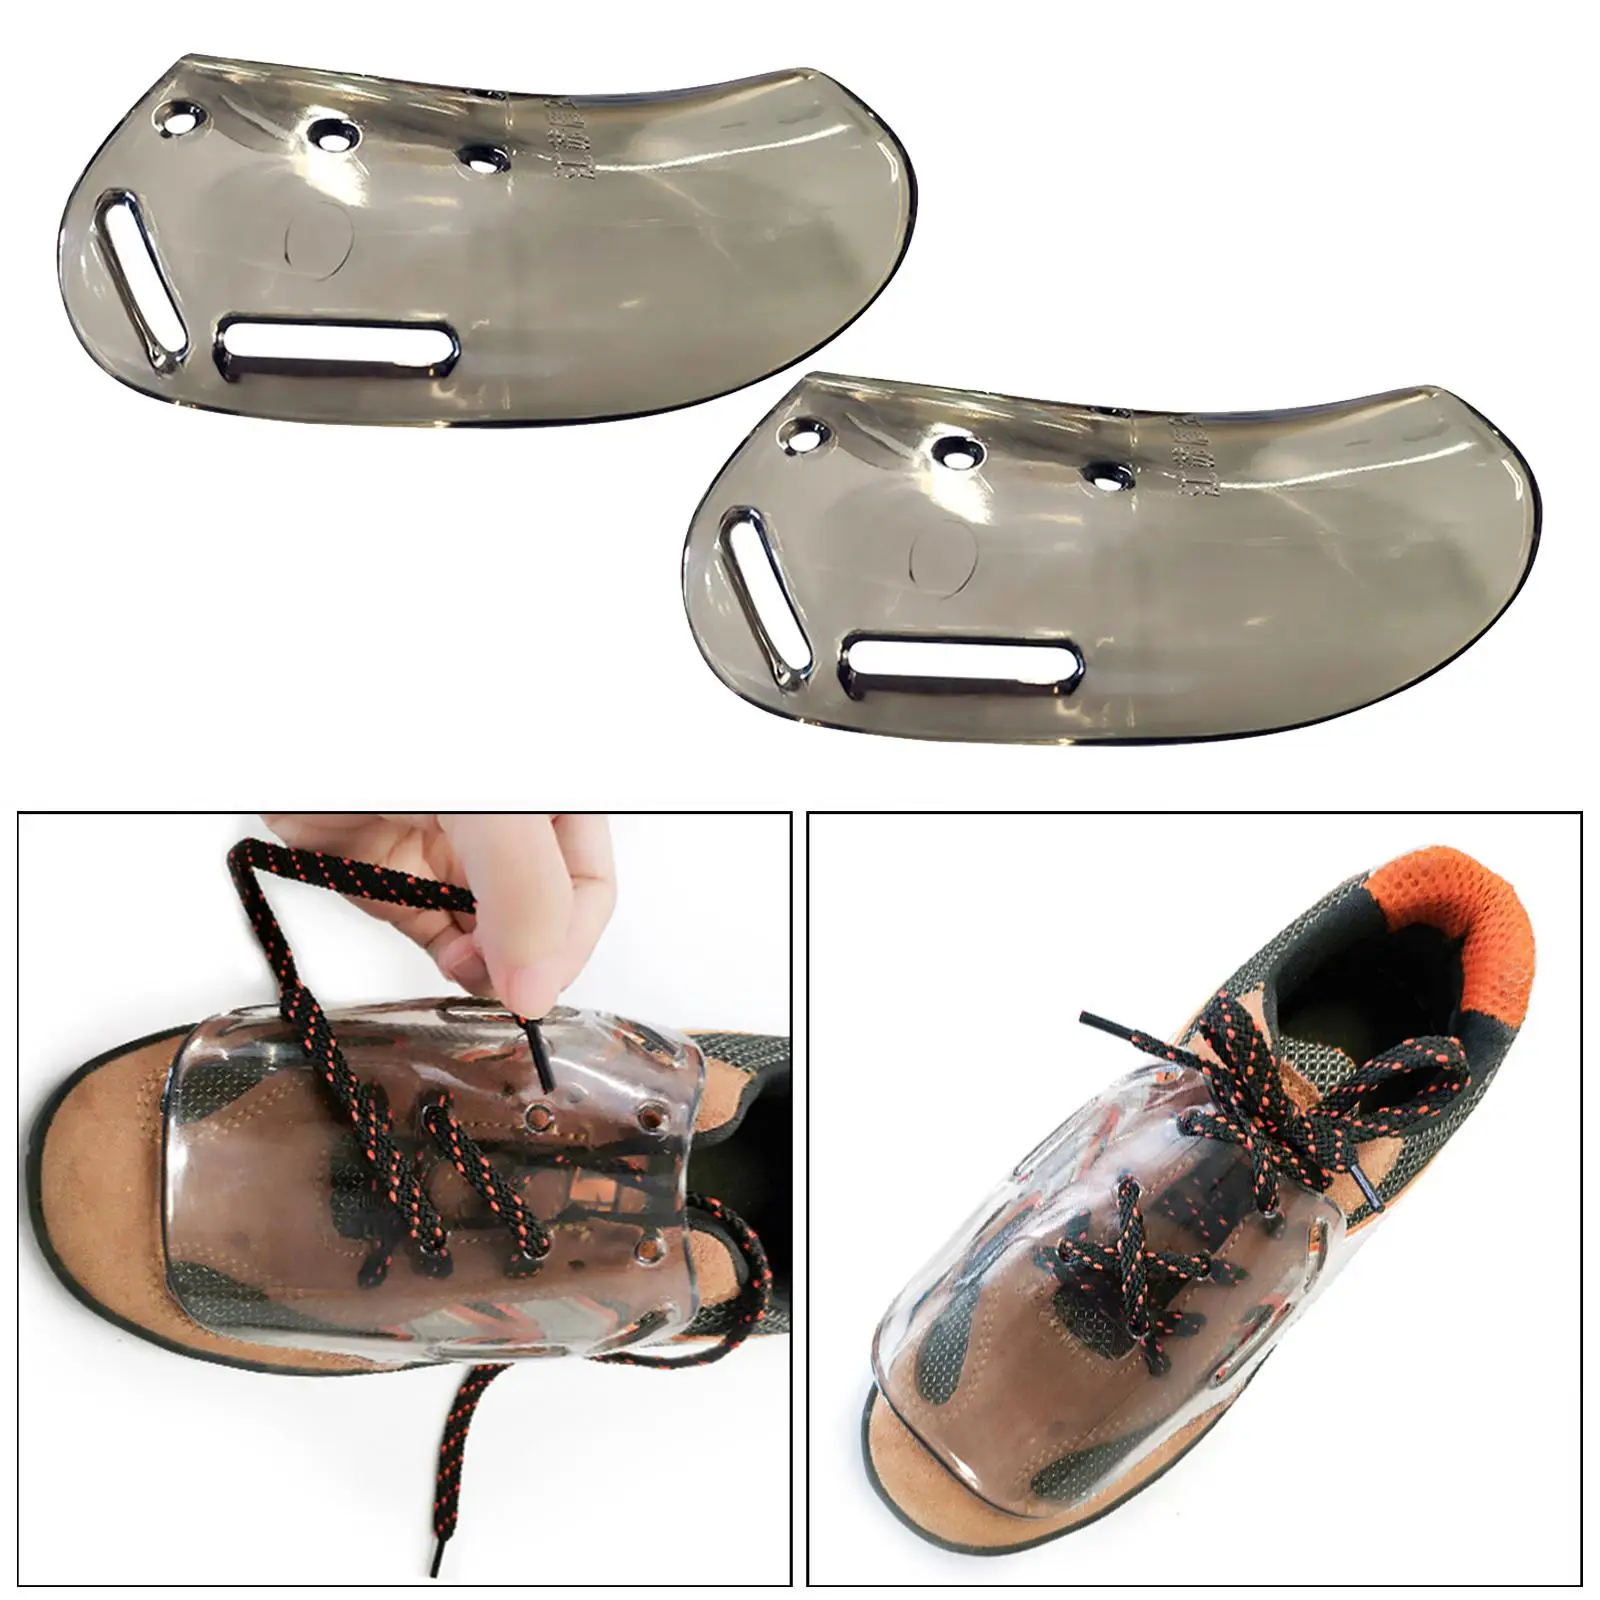 2 Pieces External Metatarsal Guard Anti-Scalding Attachment Plastic Welder Shoe Cover for Machinery Manufacturing Men Women